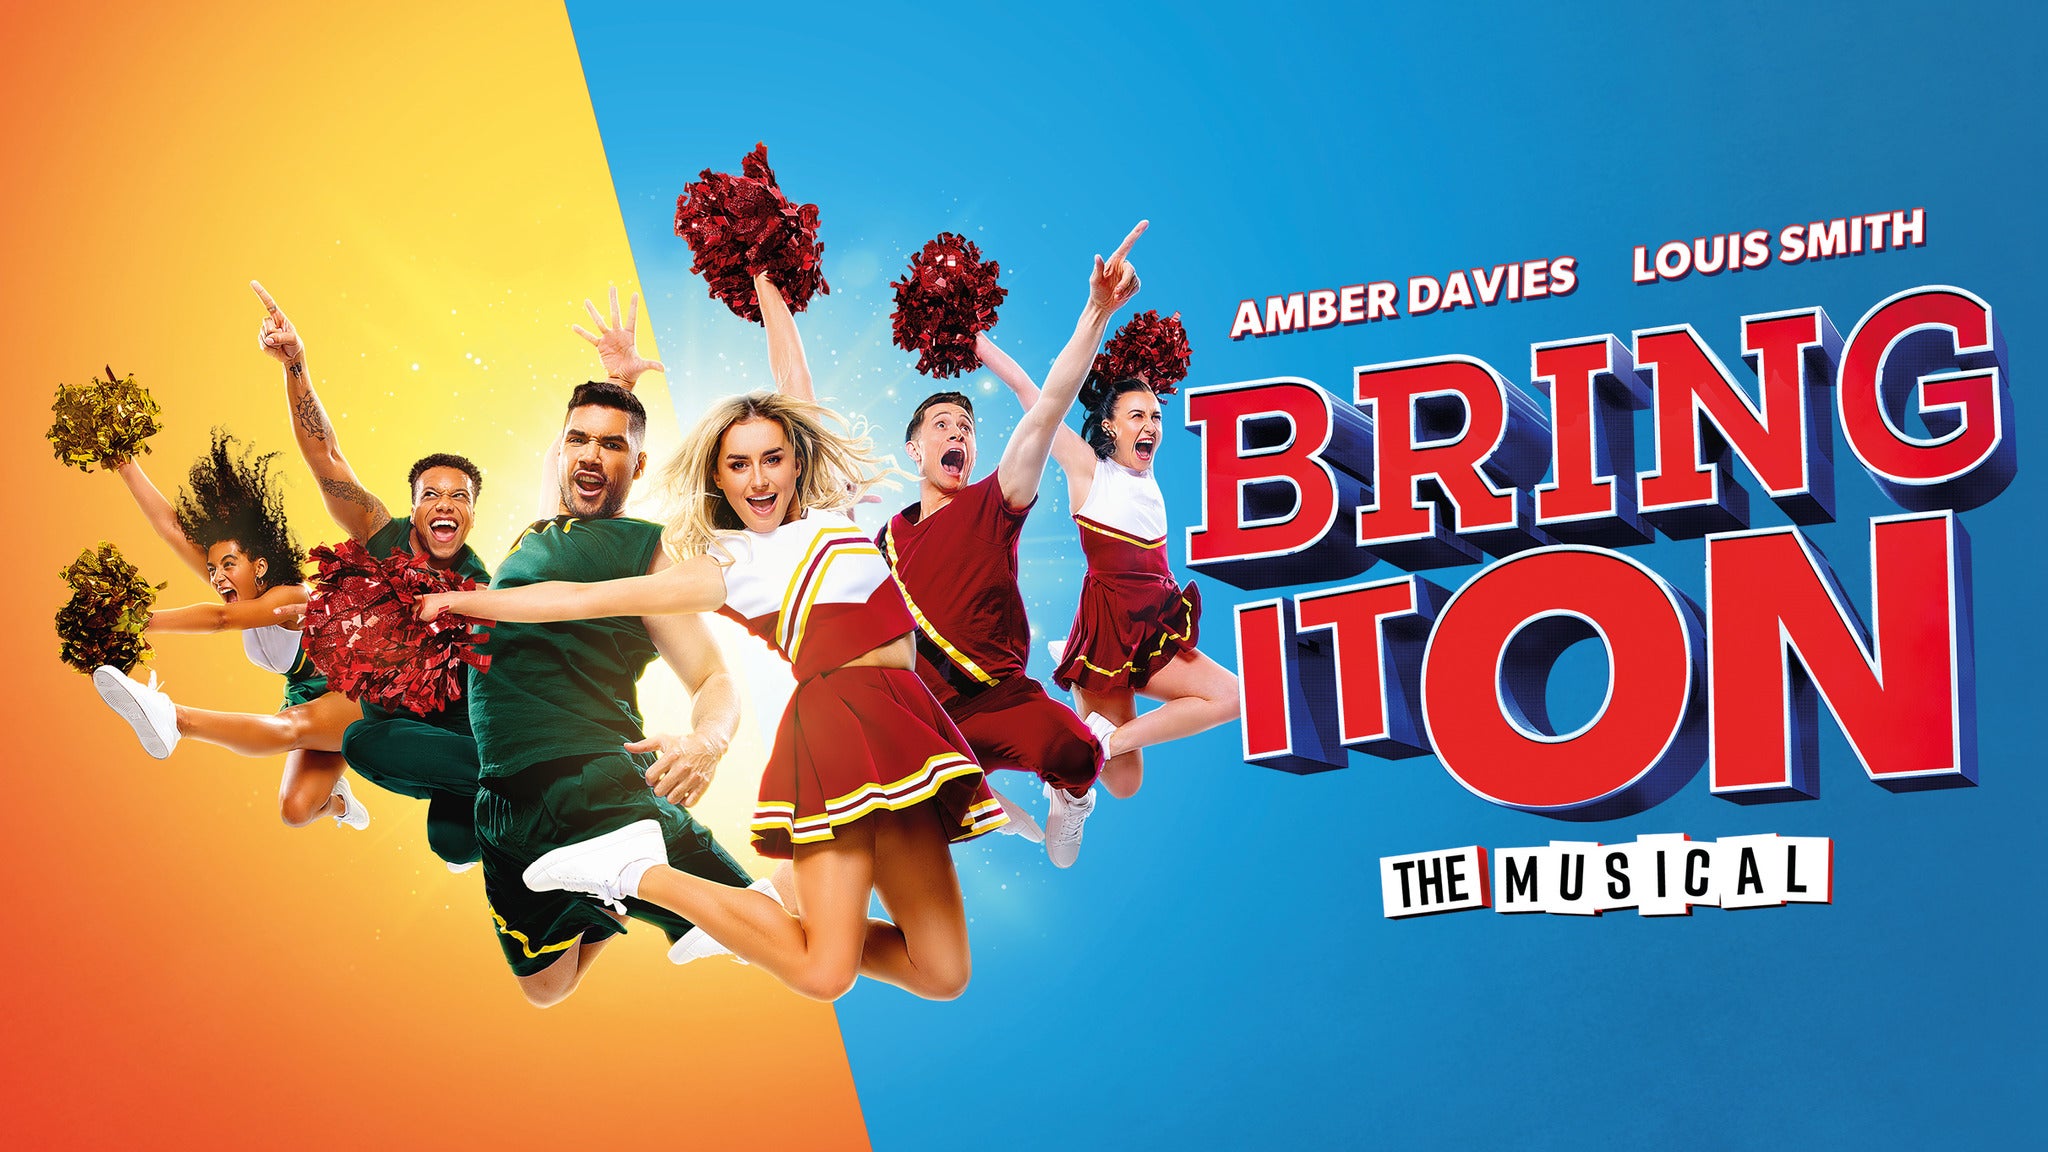 Bring It On: the Musical